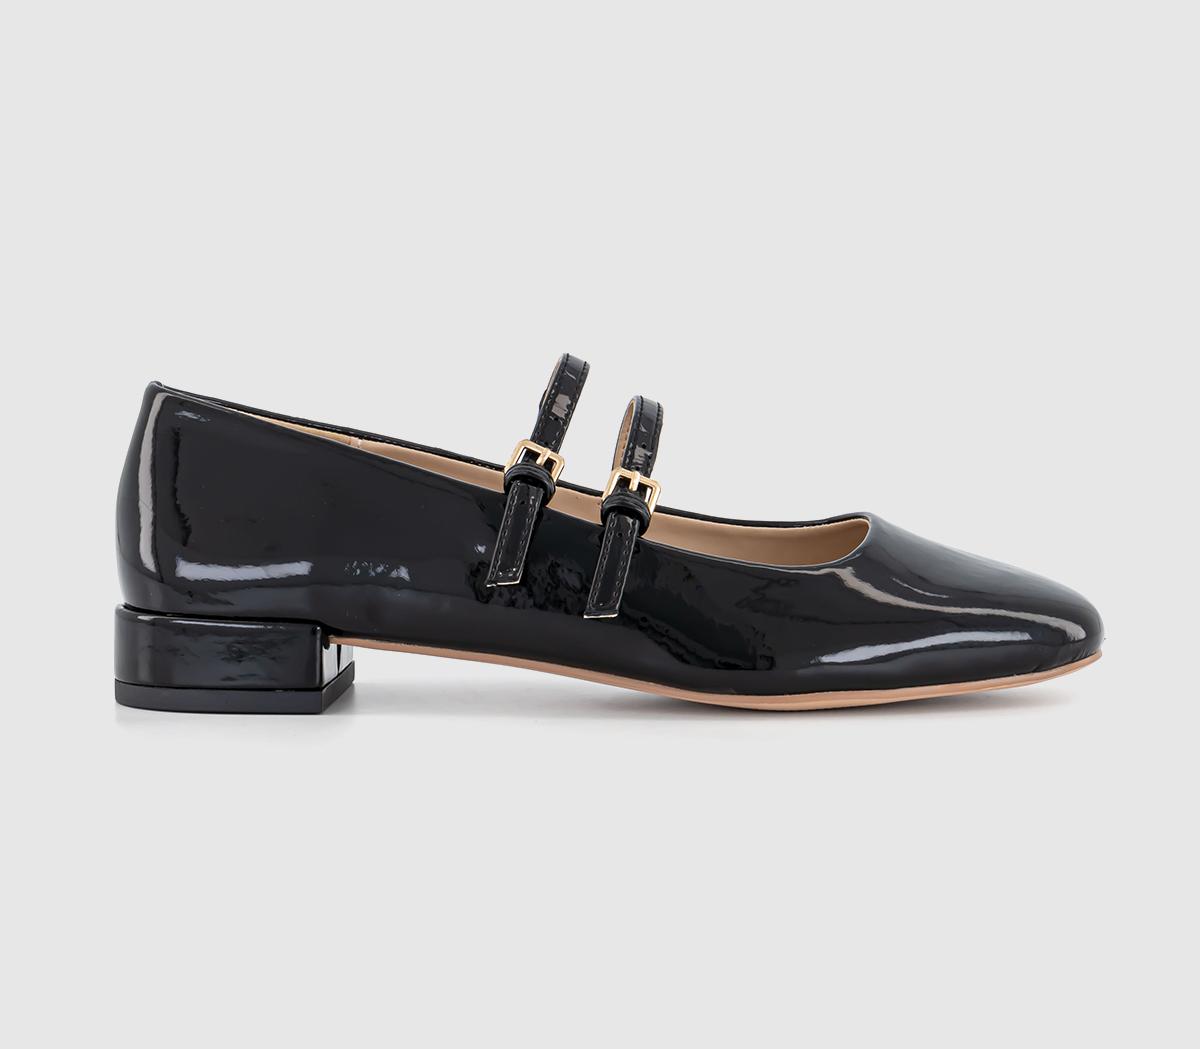 OFFICEFrances Two Strap Mary JanesNew Black Patent